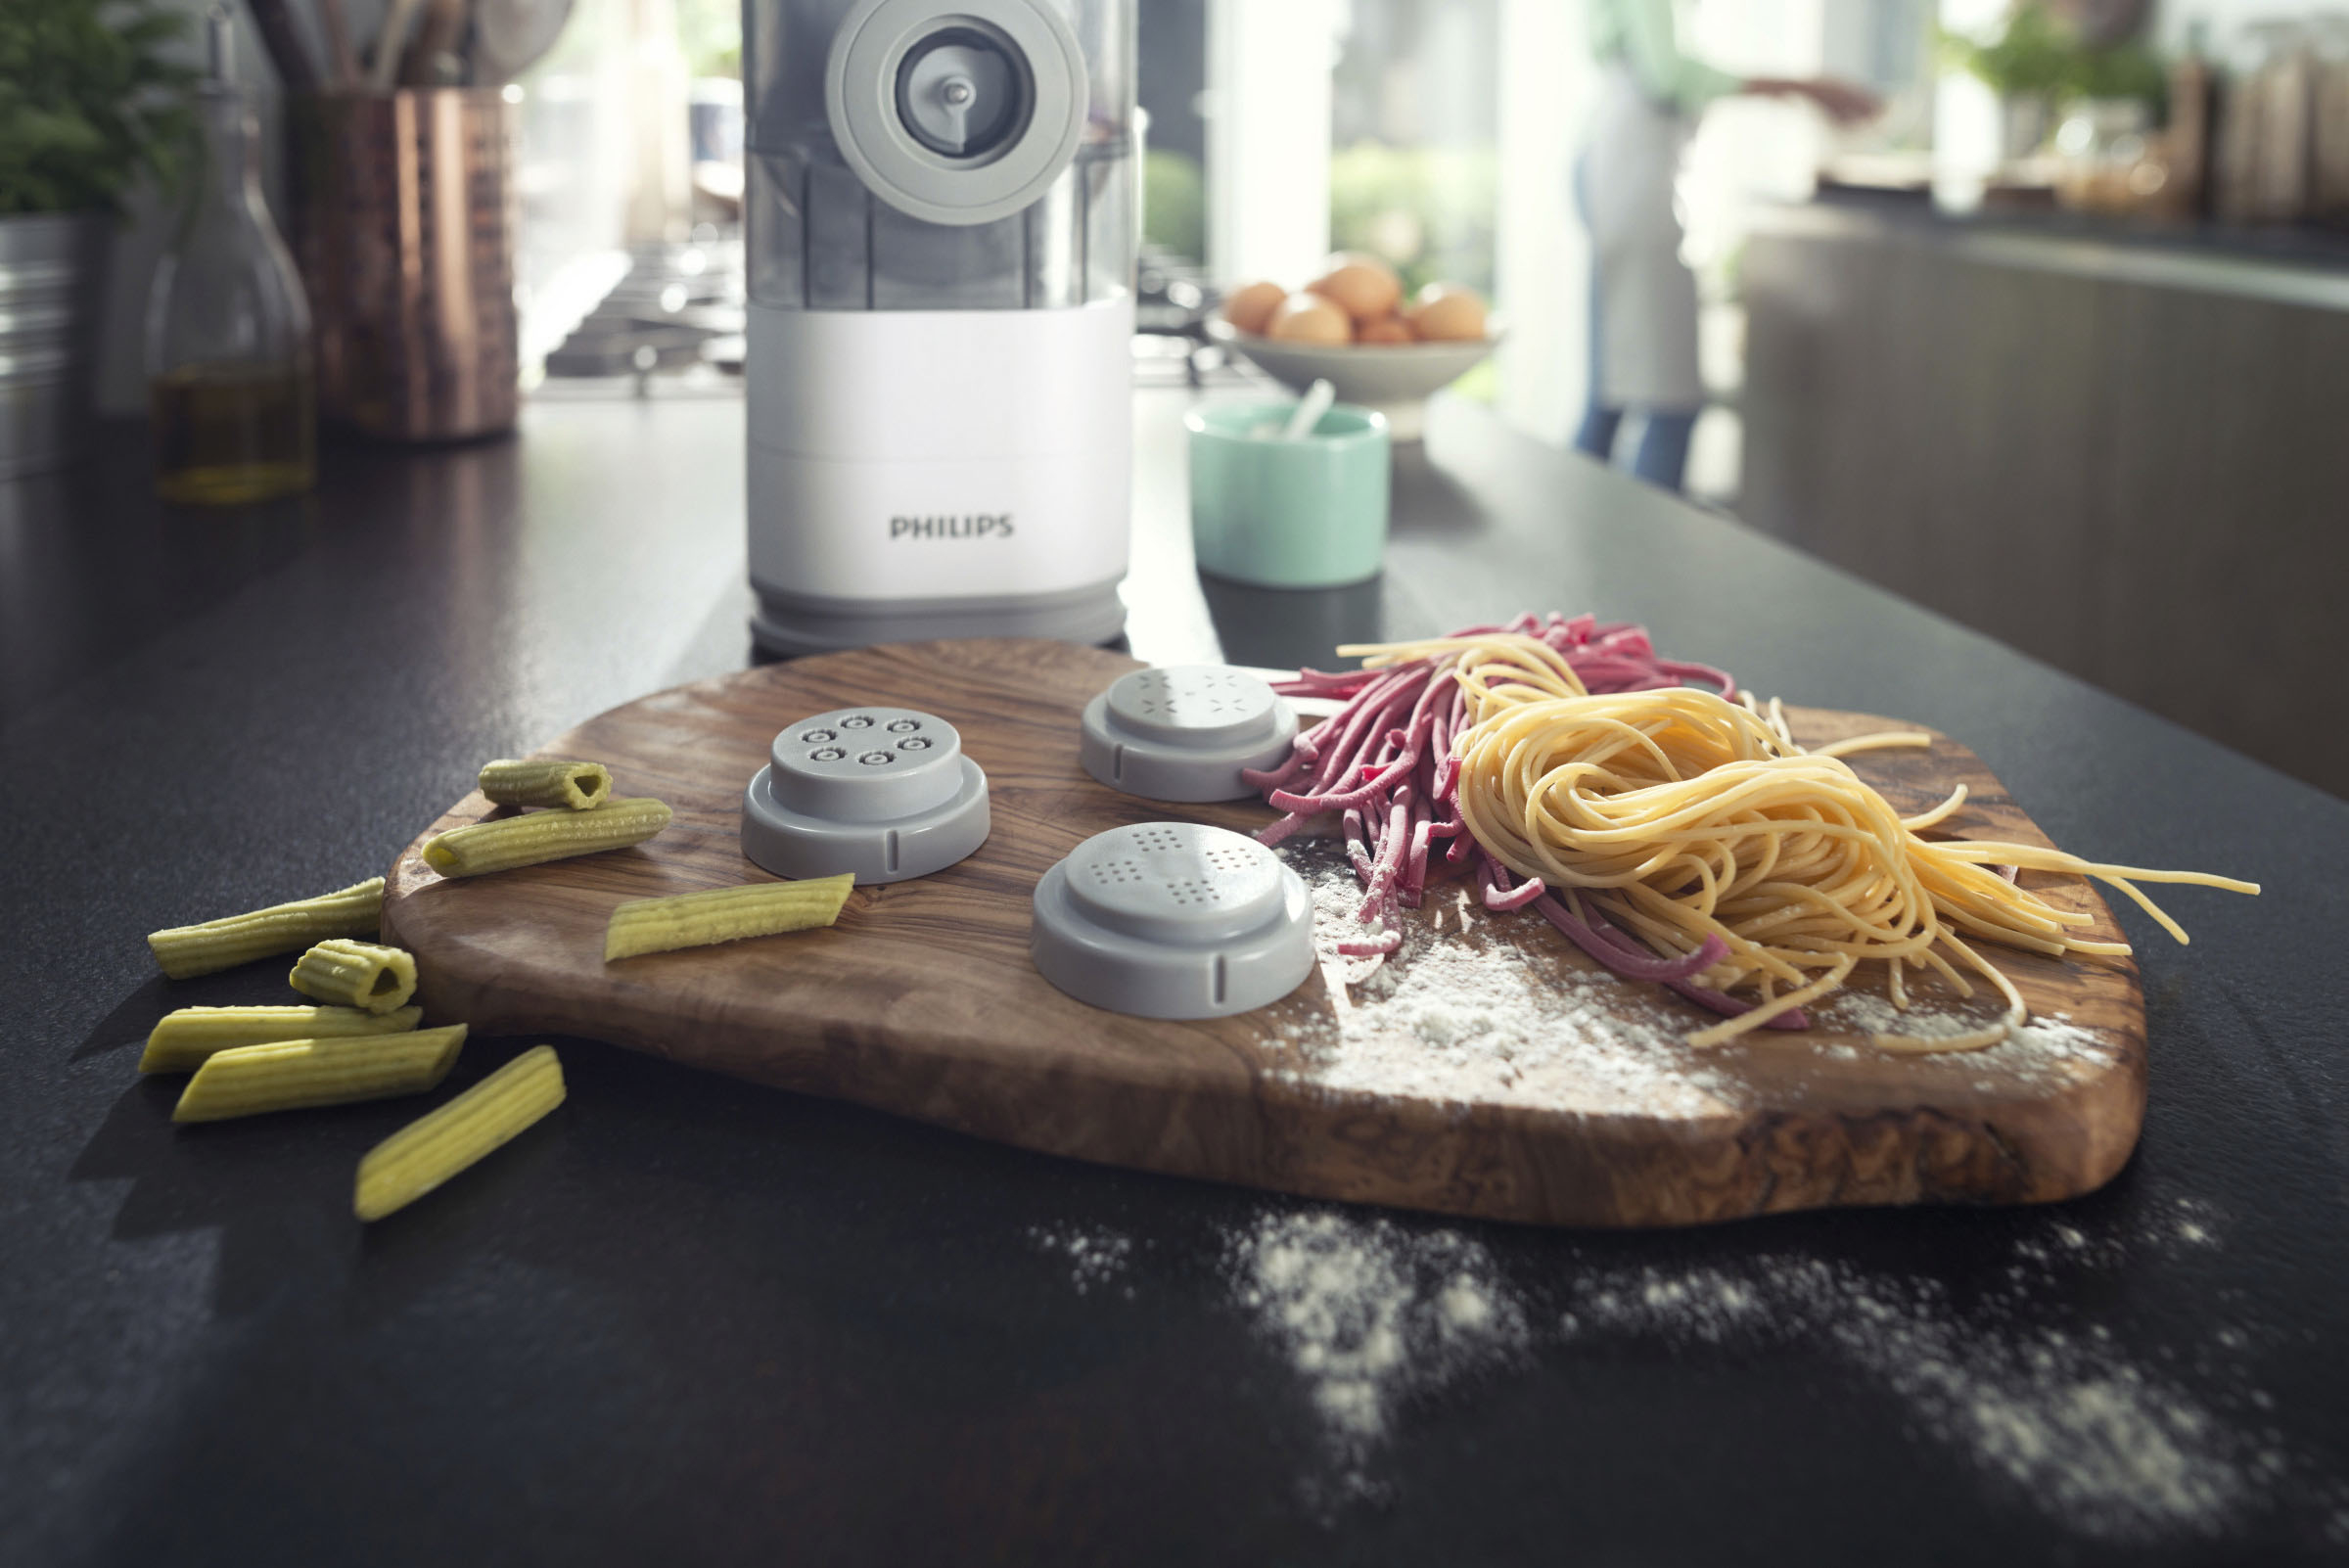  Philips HR2371/05 Compact Pasta and Noodle Maker, Black  (Renewed) : Home & Kitchen